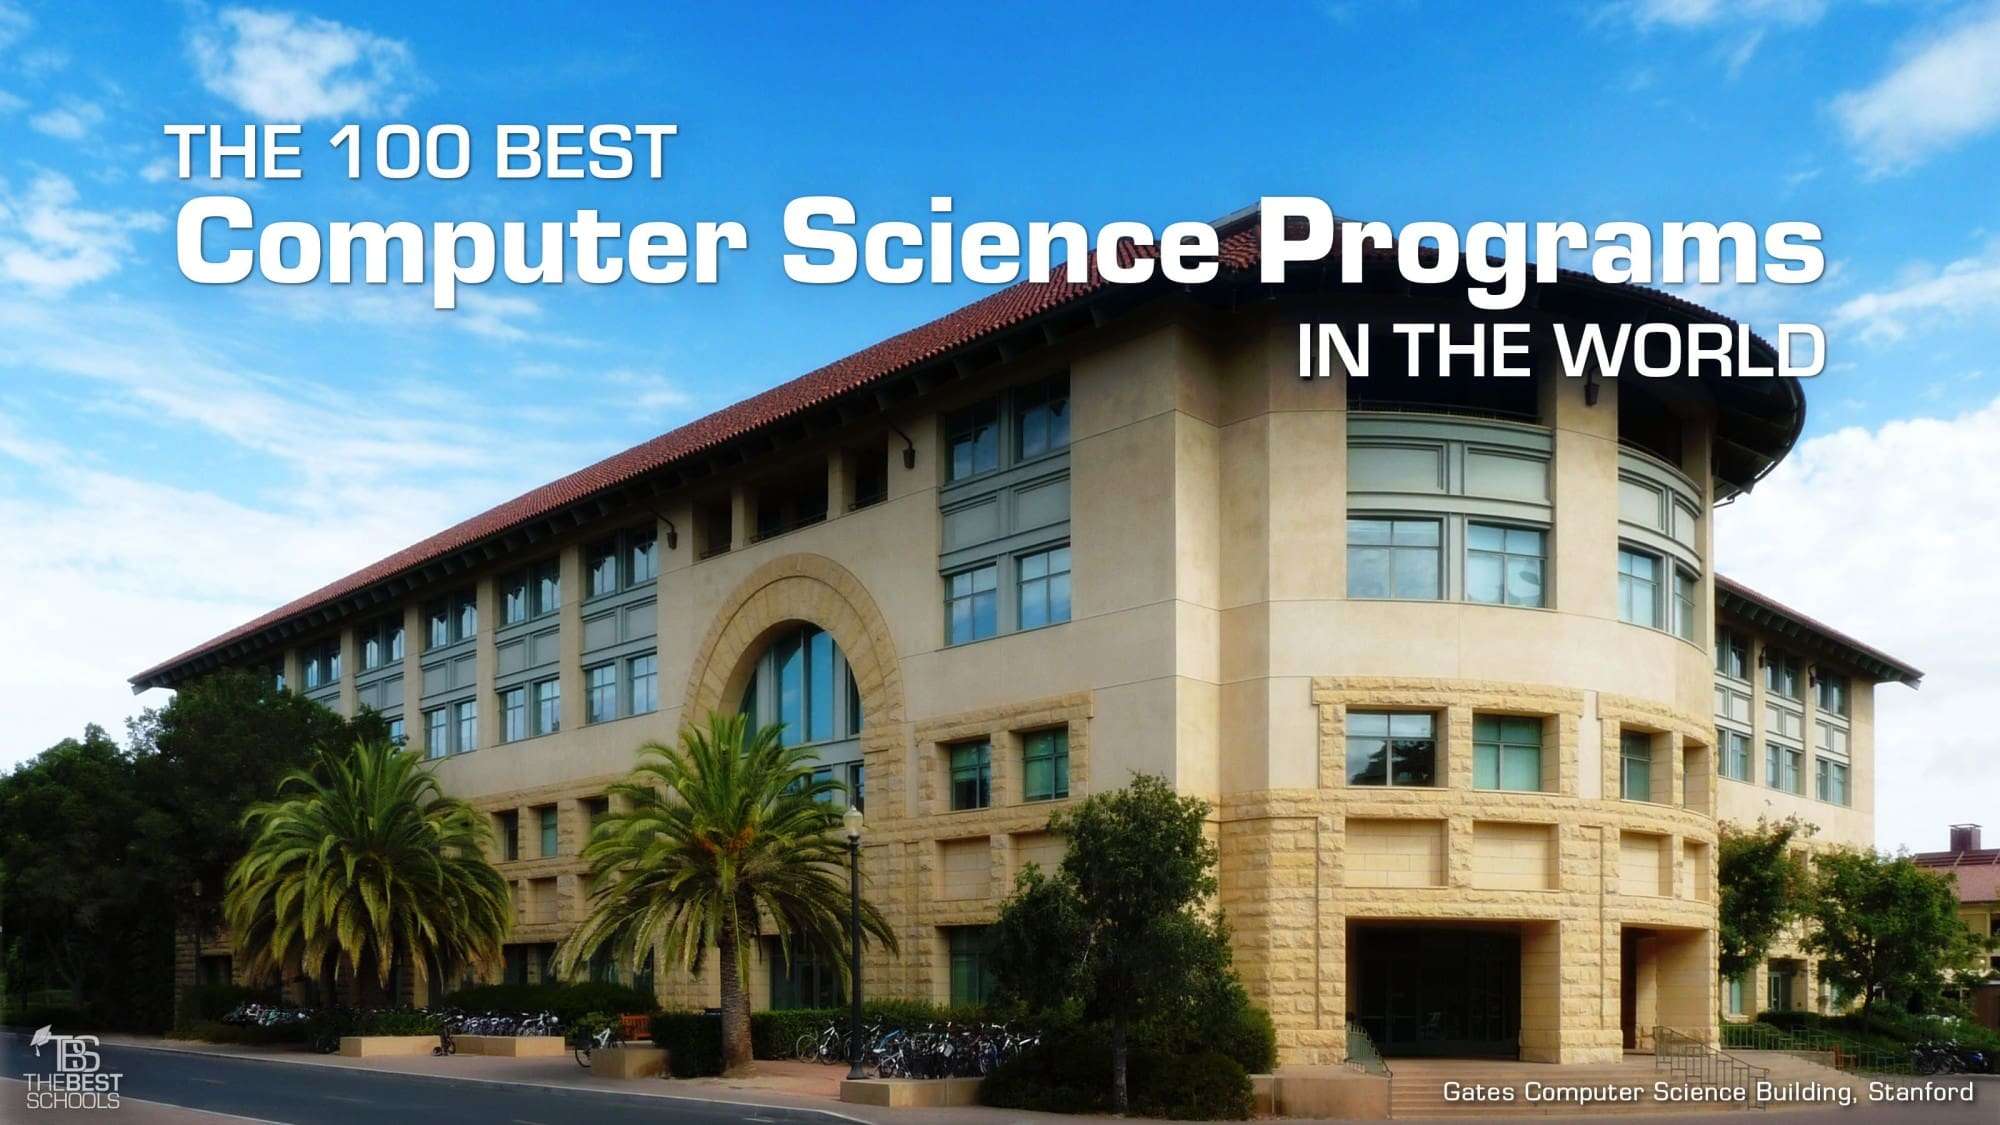 The 100 Best Computer Science Programs in the World